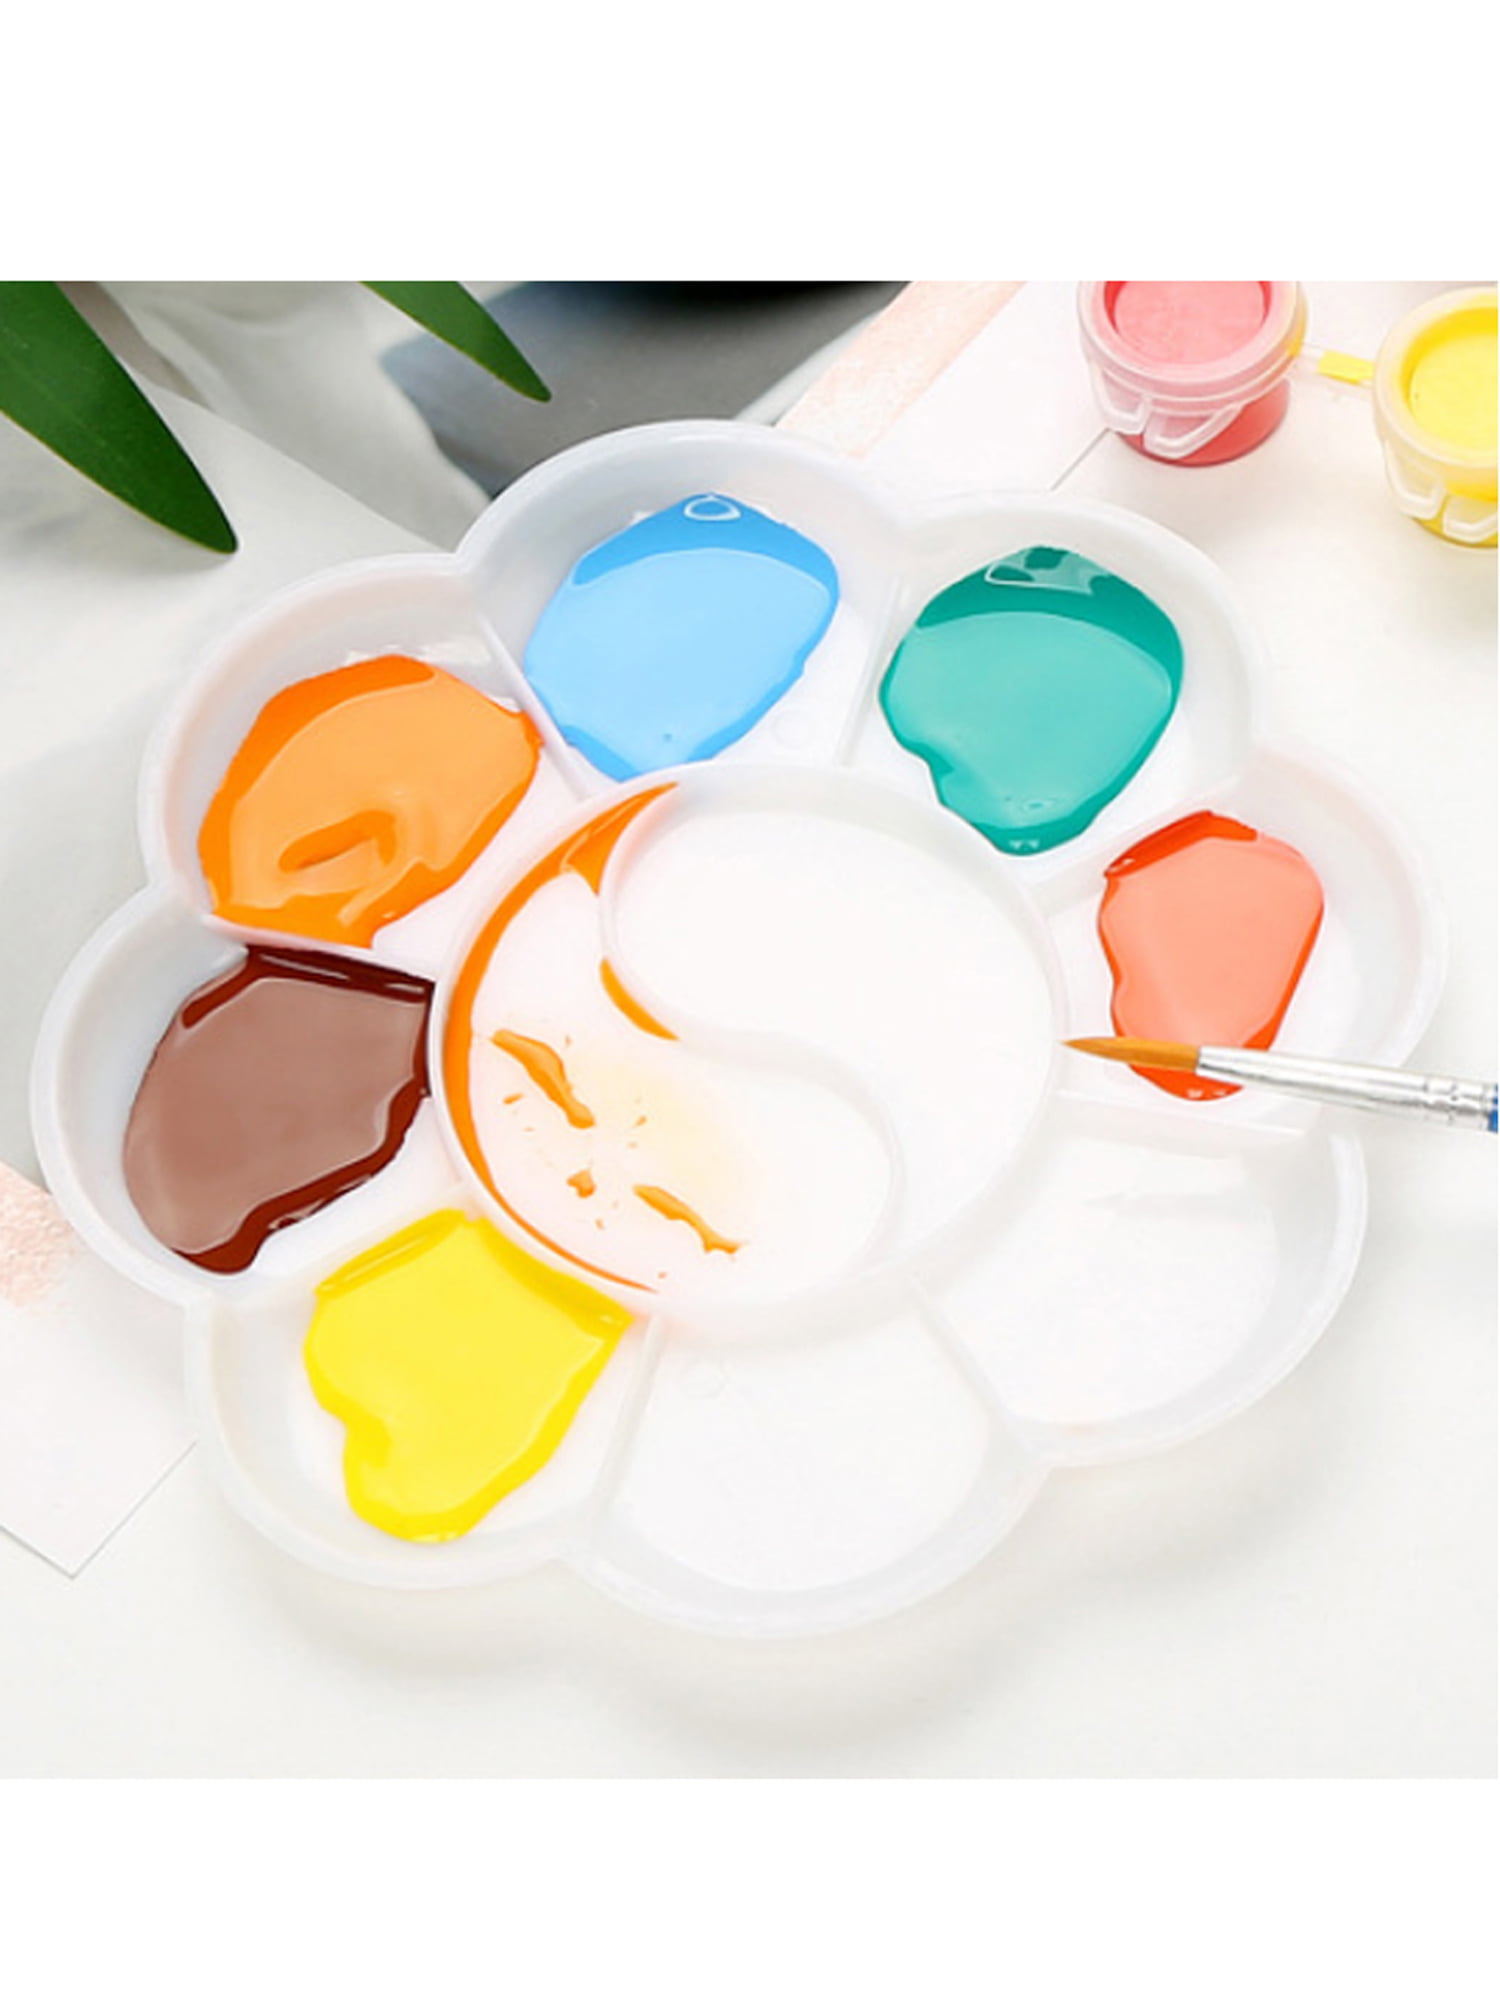 Acrylic Mixing Paint Draw Nail Art Watercolor Plastic Palette Tray 1 piece Hot 